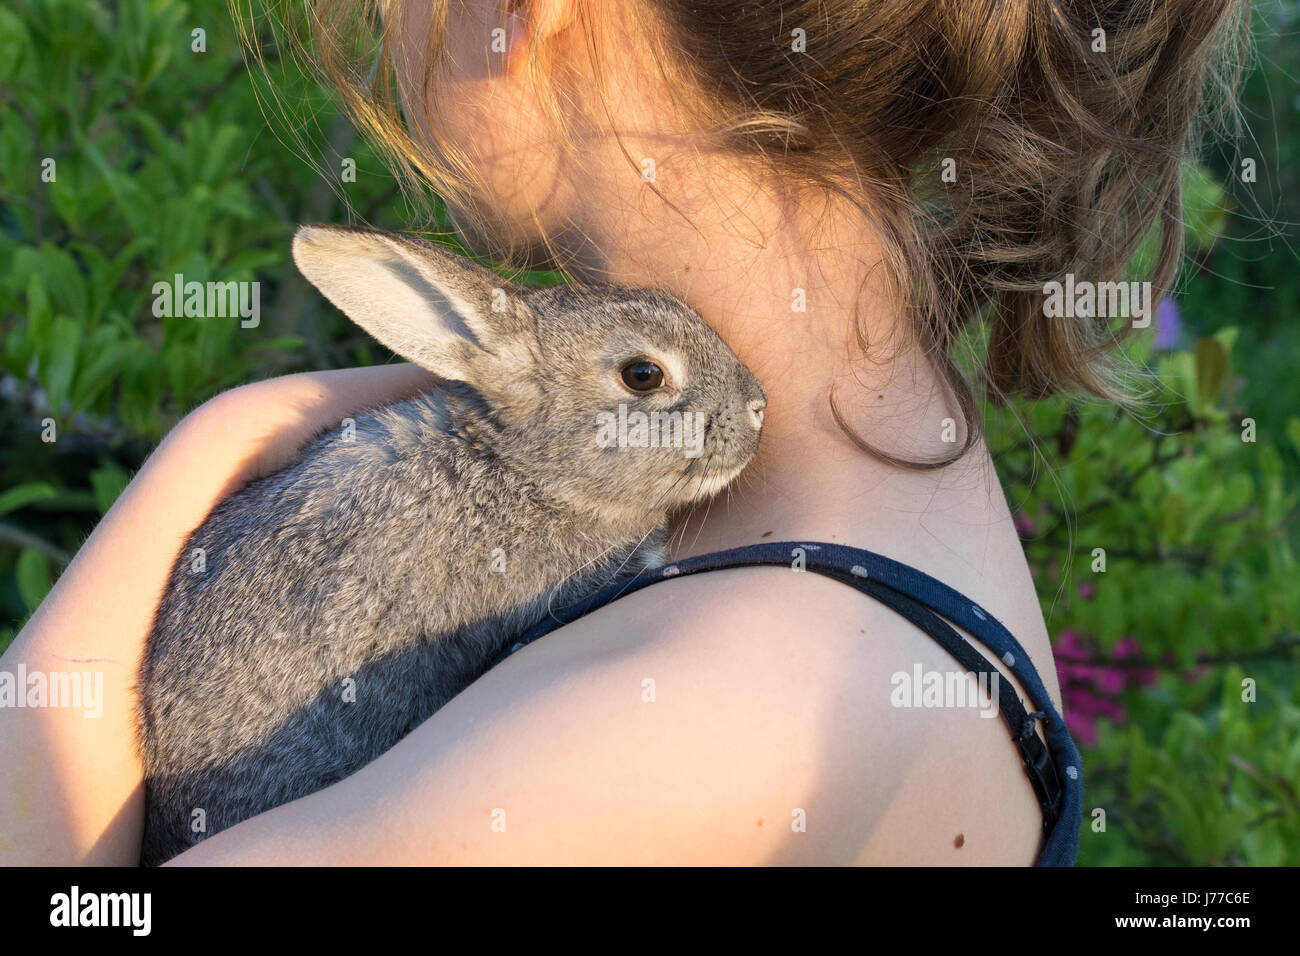 A girl is holding a small, gray rabbit Stock Photo